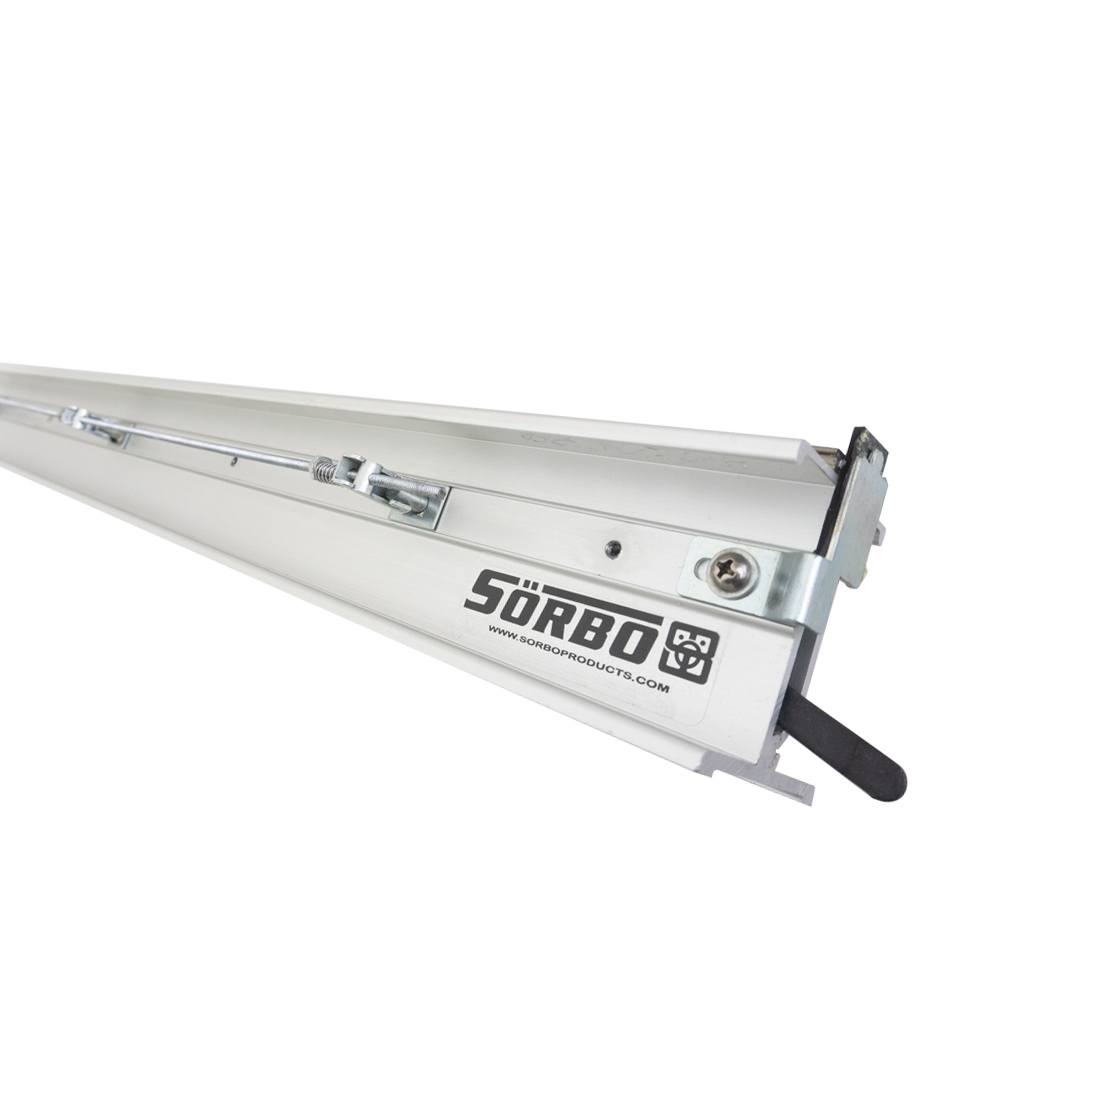 Sörbo Docket Squeegee Sharpener - 36 Inch - Angled Right Side Close-Up View